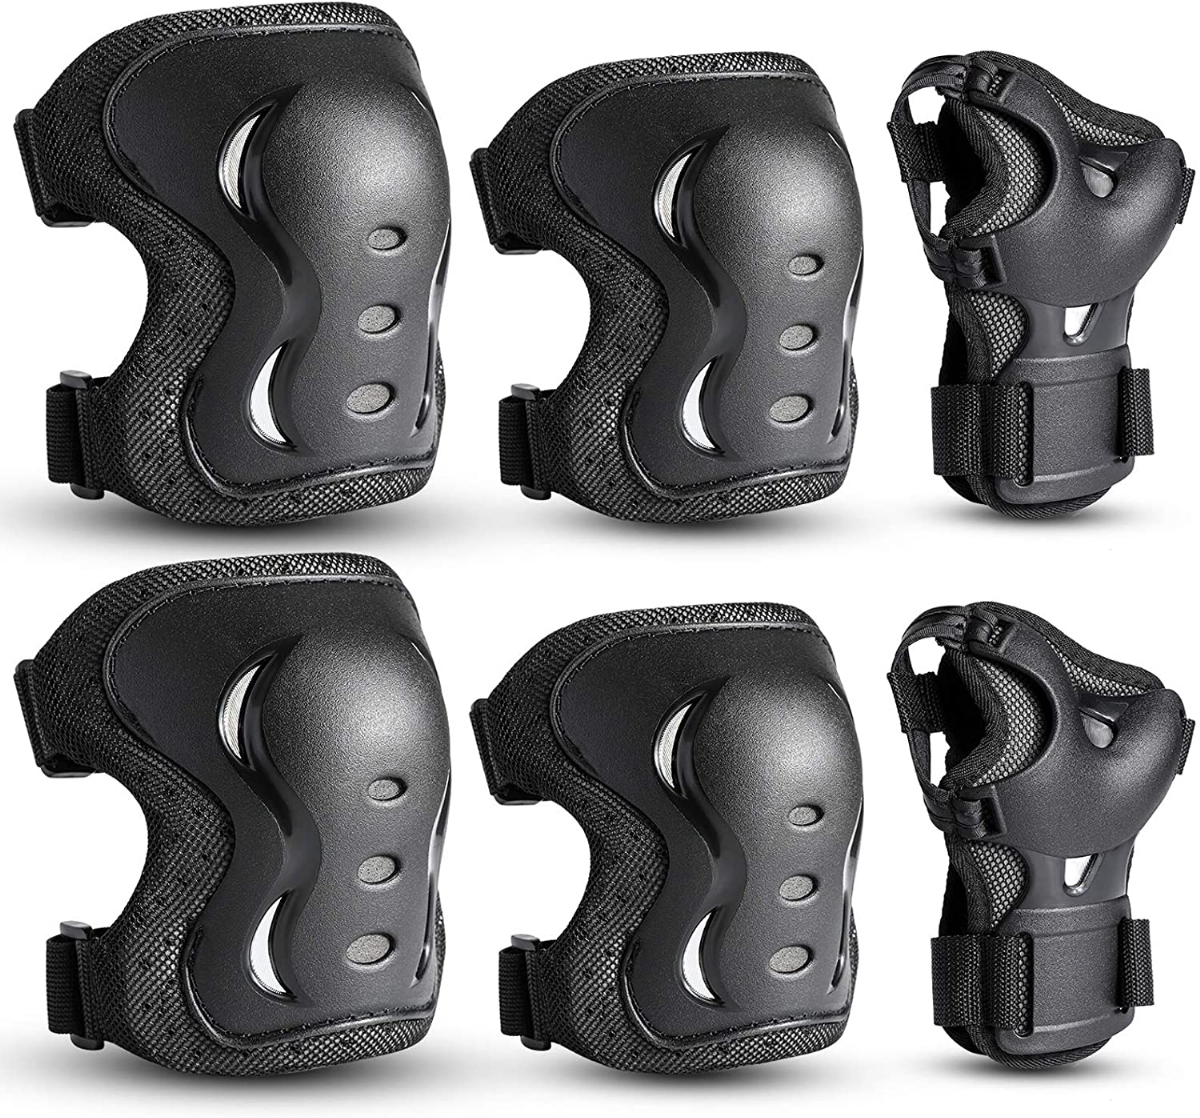 GEQID Youth/Kids Knee Pads Elbow Pads Wrist Guards 3 in 1 Protective Gear Set for Child Skateboarding Inline Roller Skating Rollerblade Biking BMX Bicycle 